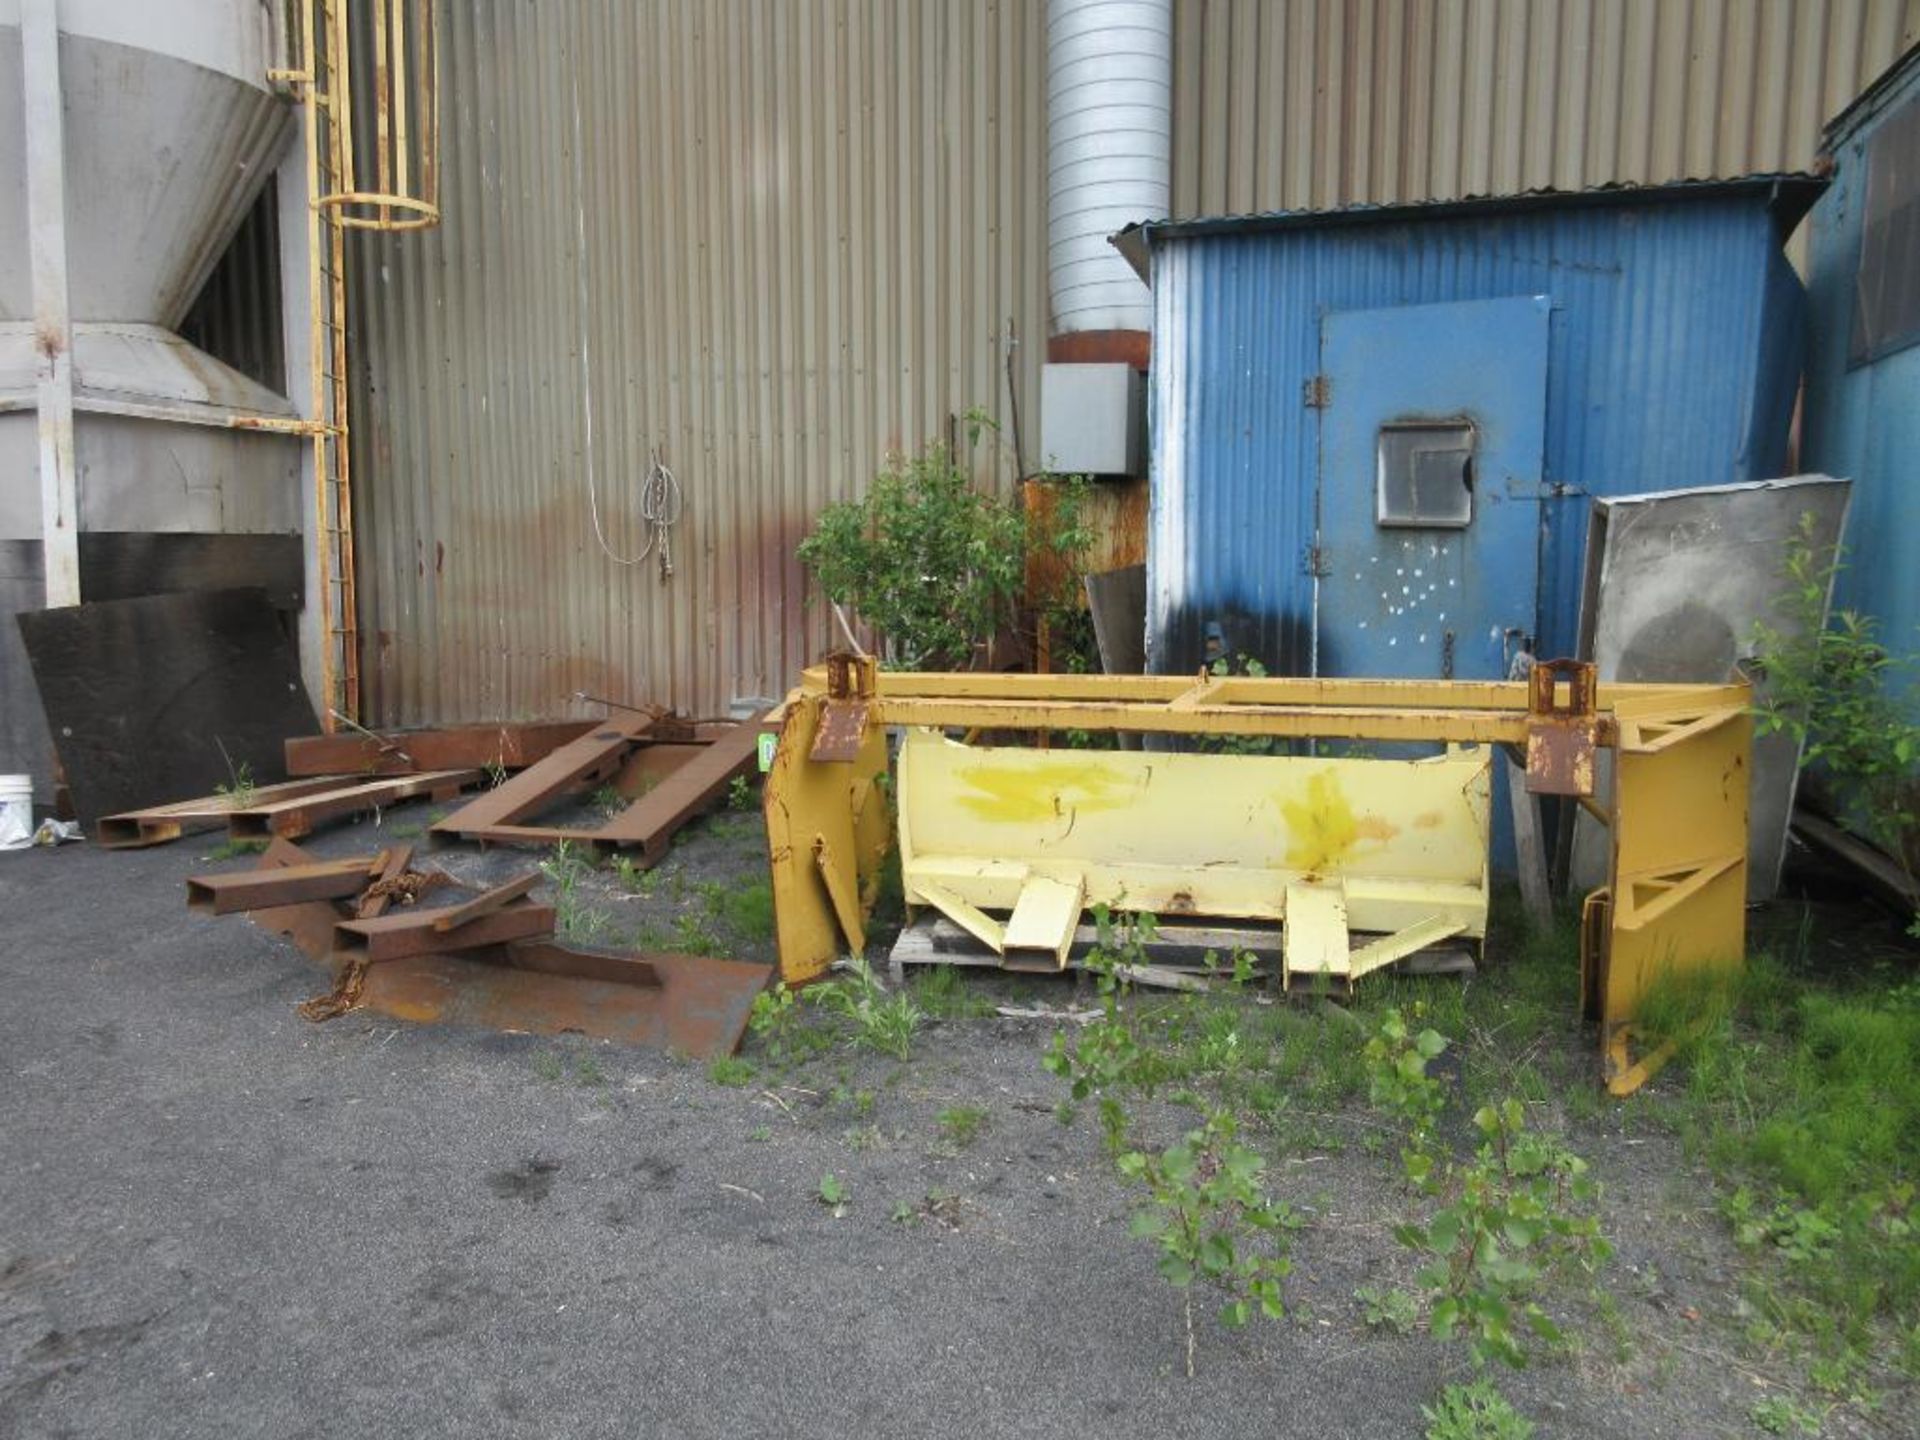 LOT OF 6 SNOW PLOUGH IBG.GRATING FOR TRUCK ATTACHMENTS (NORTH PAINT BLDG)